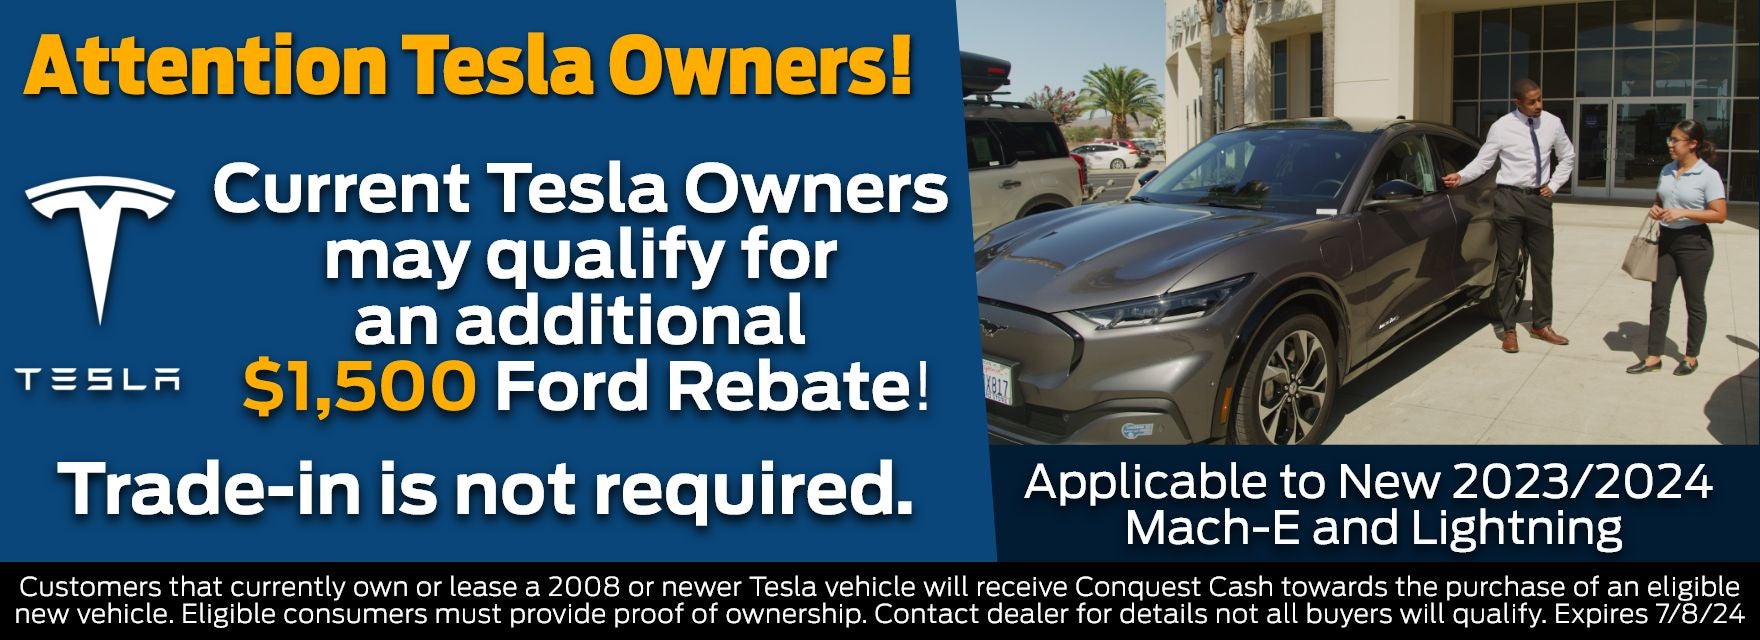 Current Tesla Owners may qualify for an additional $1,500